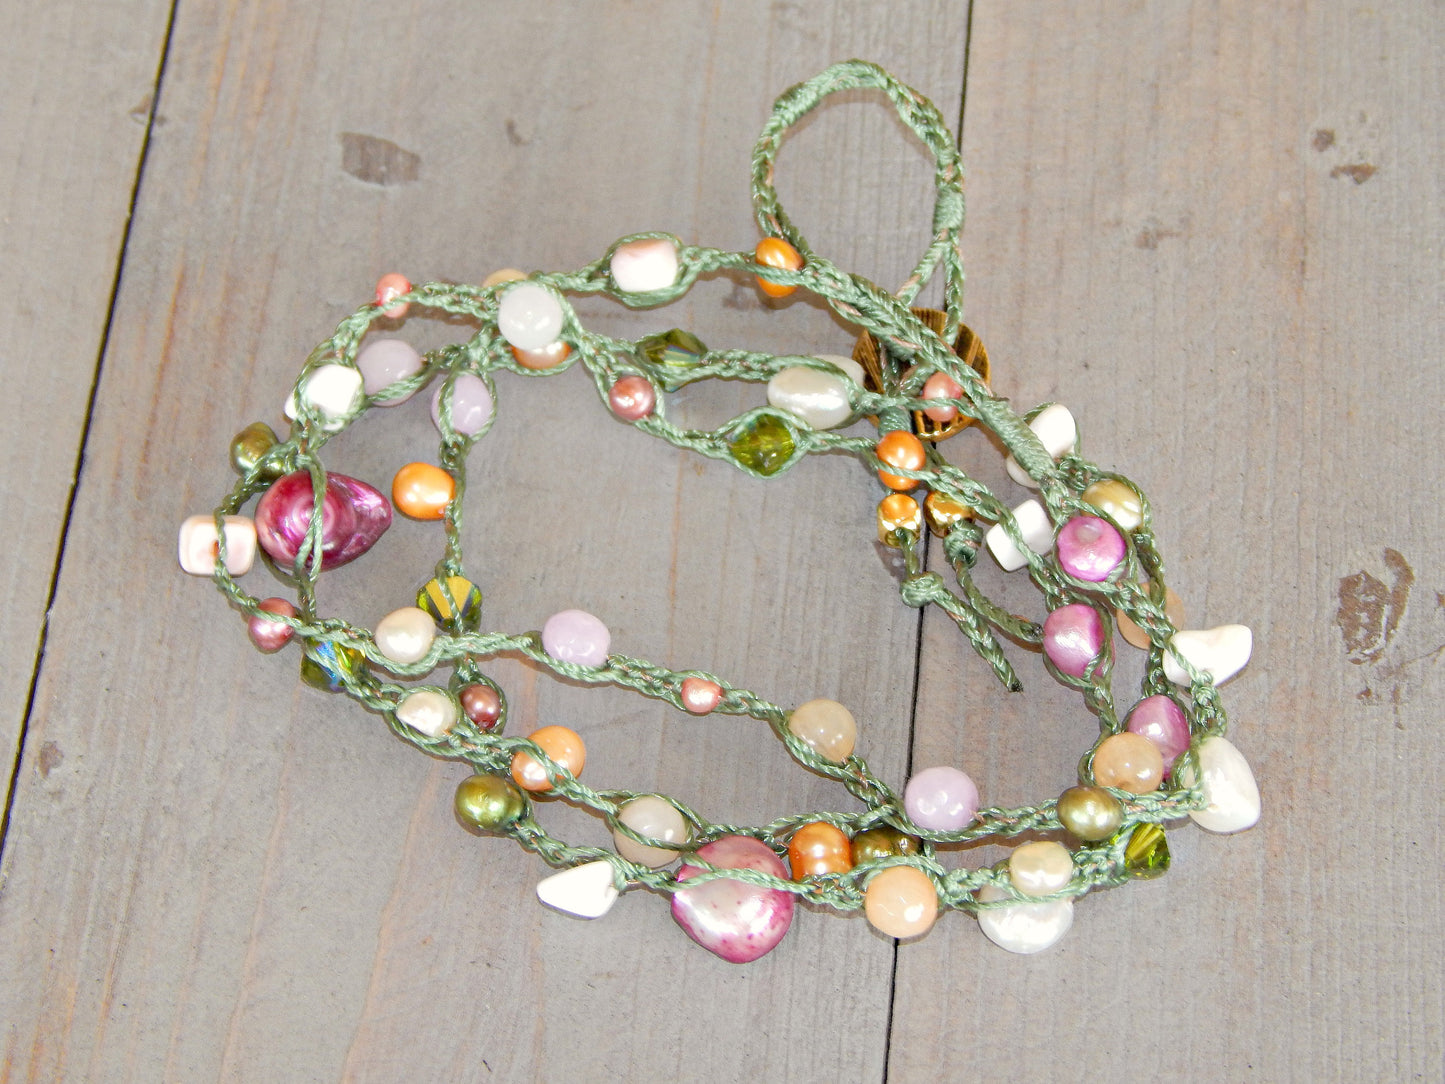 Olive, Blush, and Peach Pearl Wrap Bracelet, Anklet